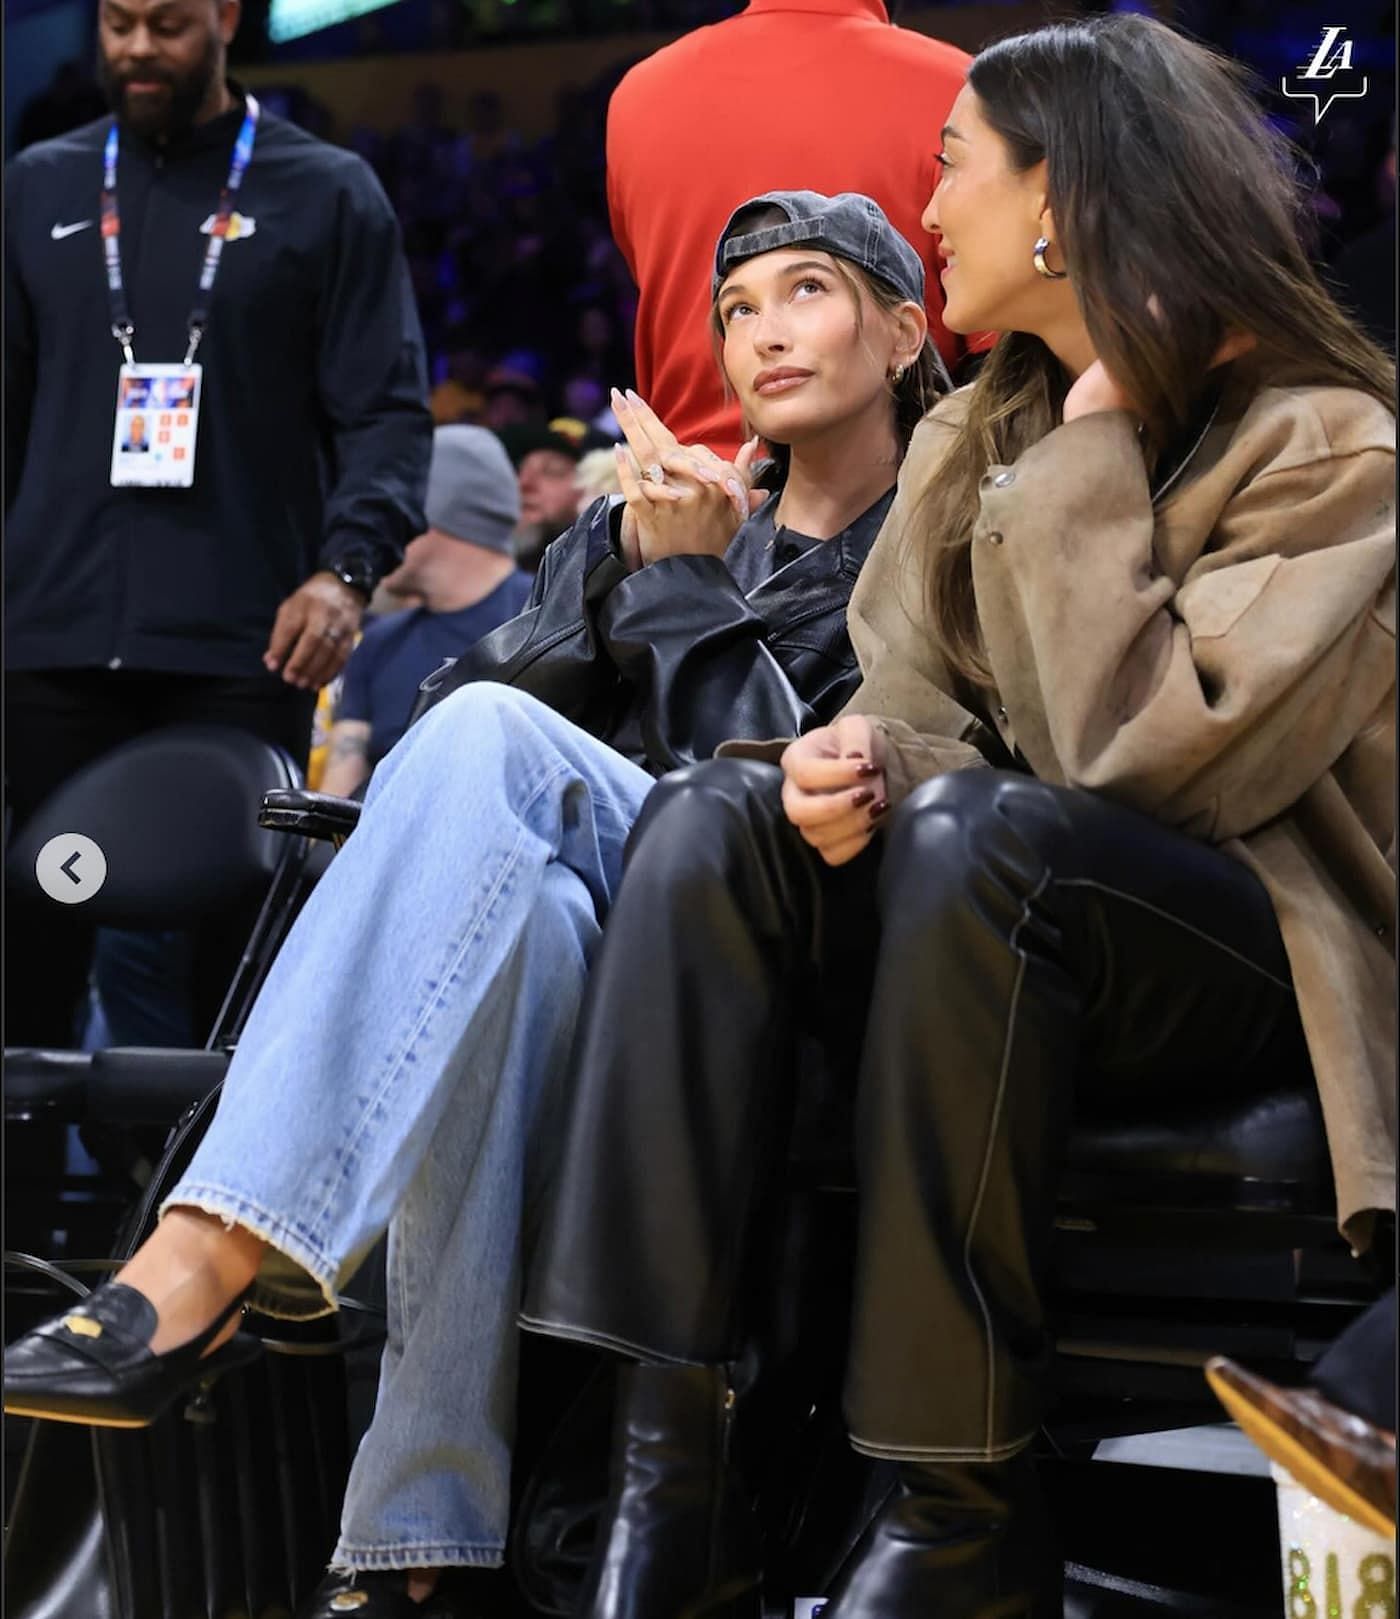 Hailey Bieber and Sarah Staudinger courtside at the Lakers game